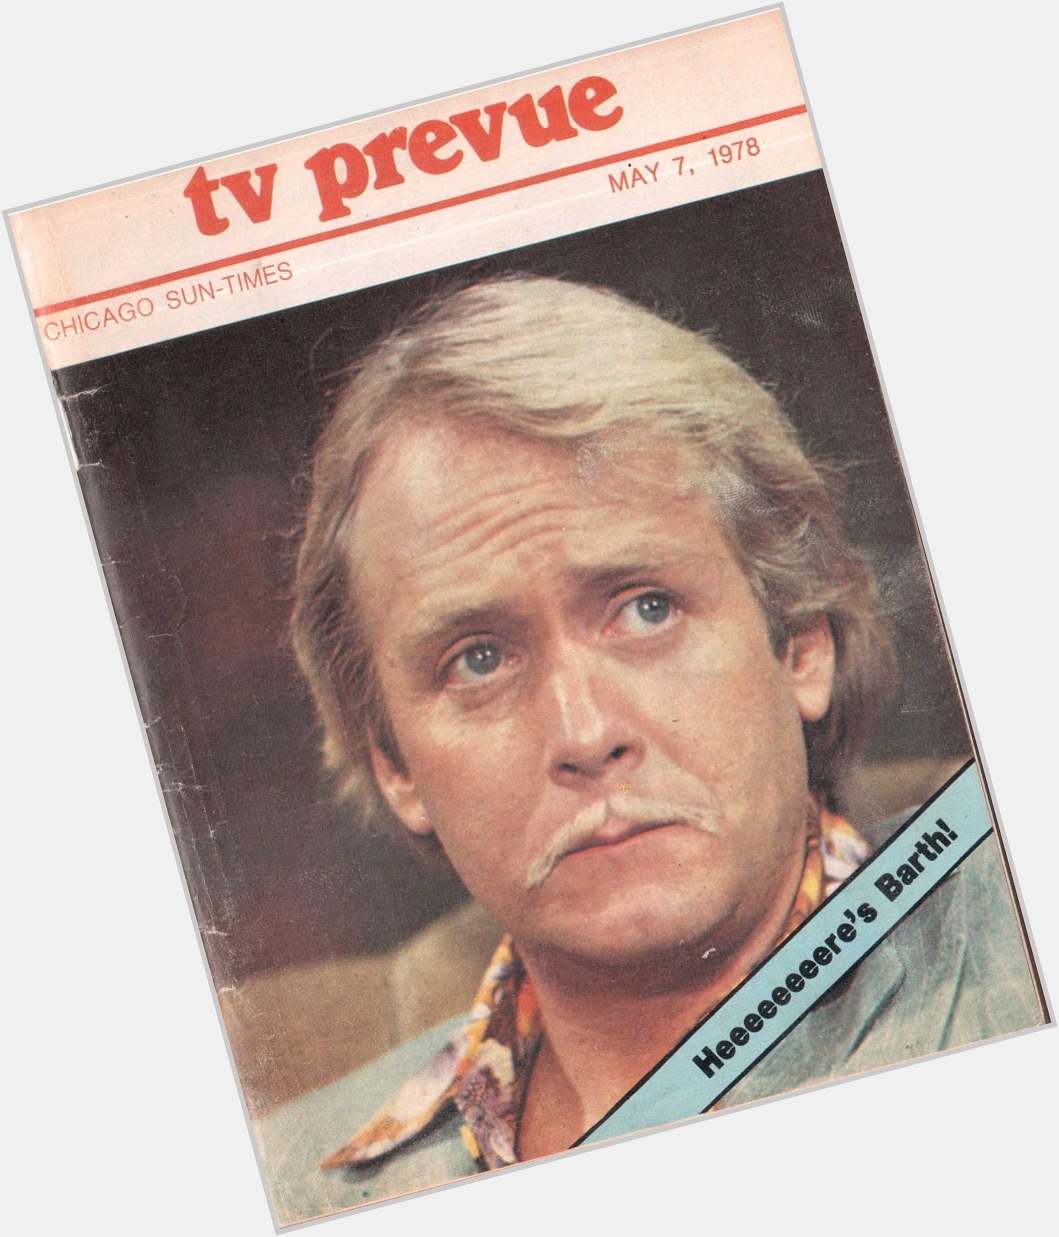 Happy Birthday to Chicago\s Martin Mull, born on this day in 1943
Sun-Times TV Prevue (1978) and TV Week (1984) 